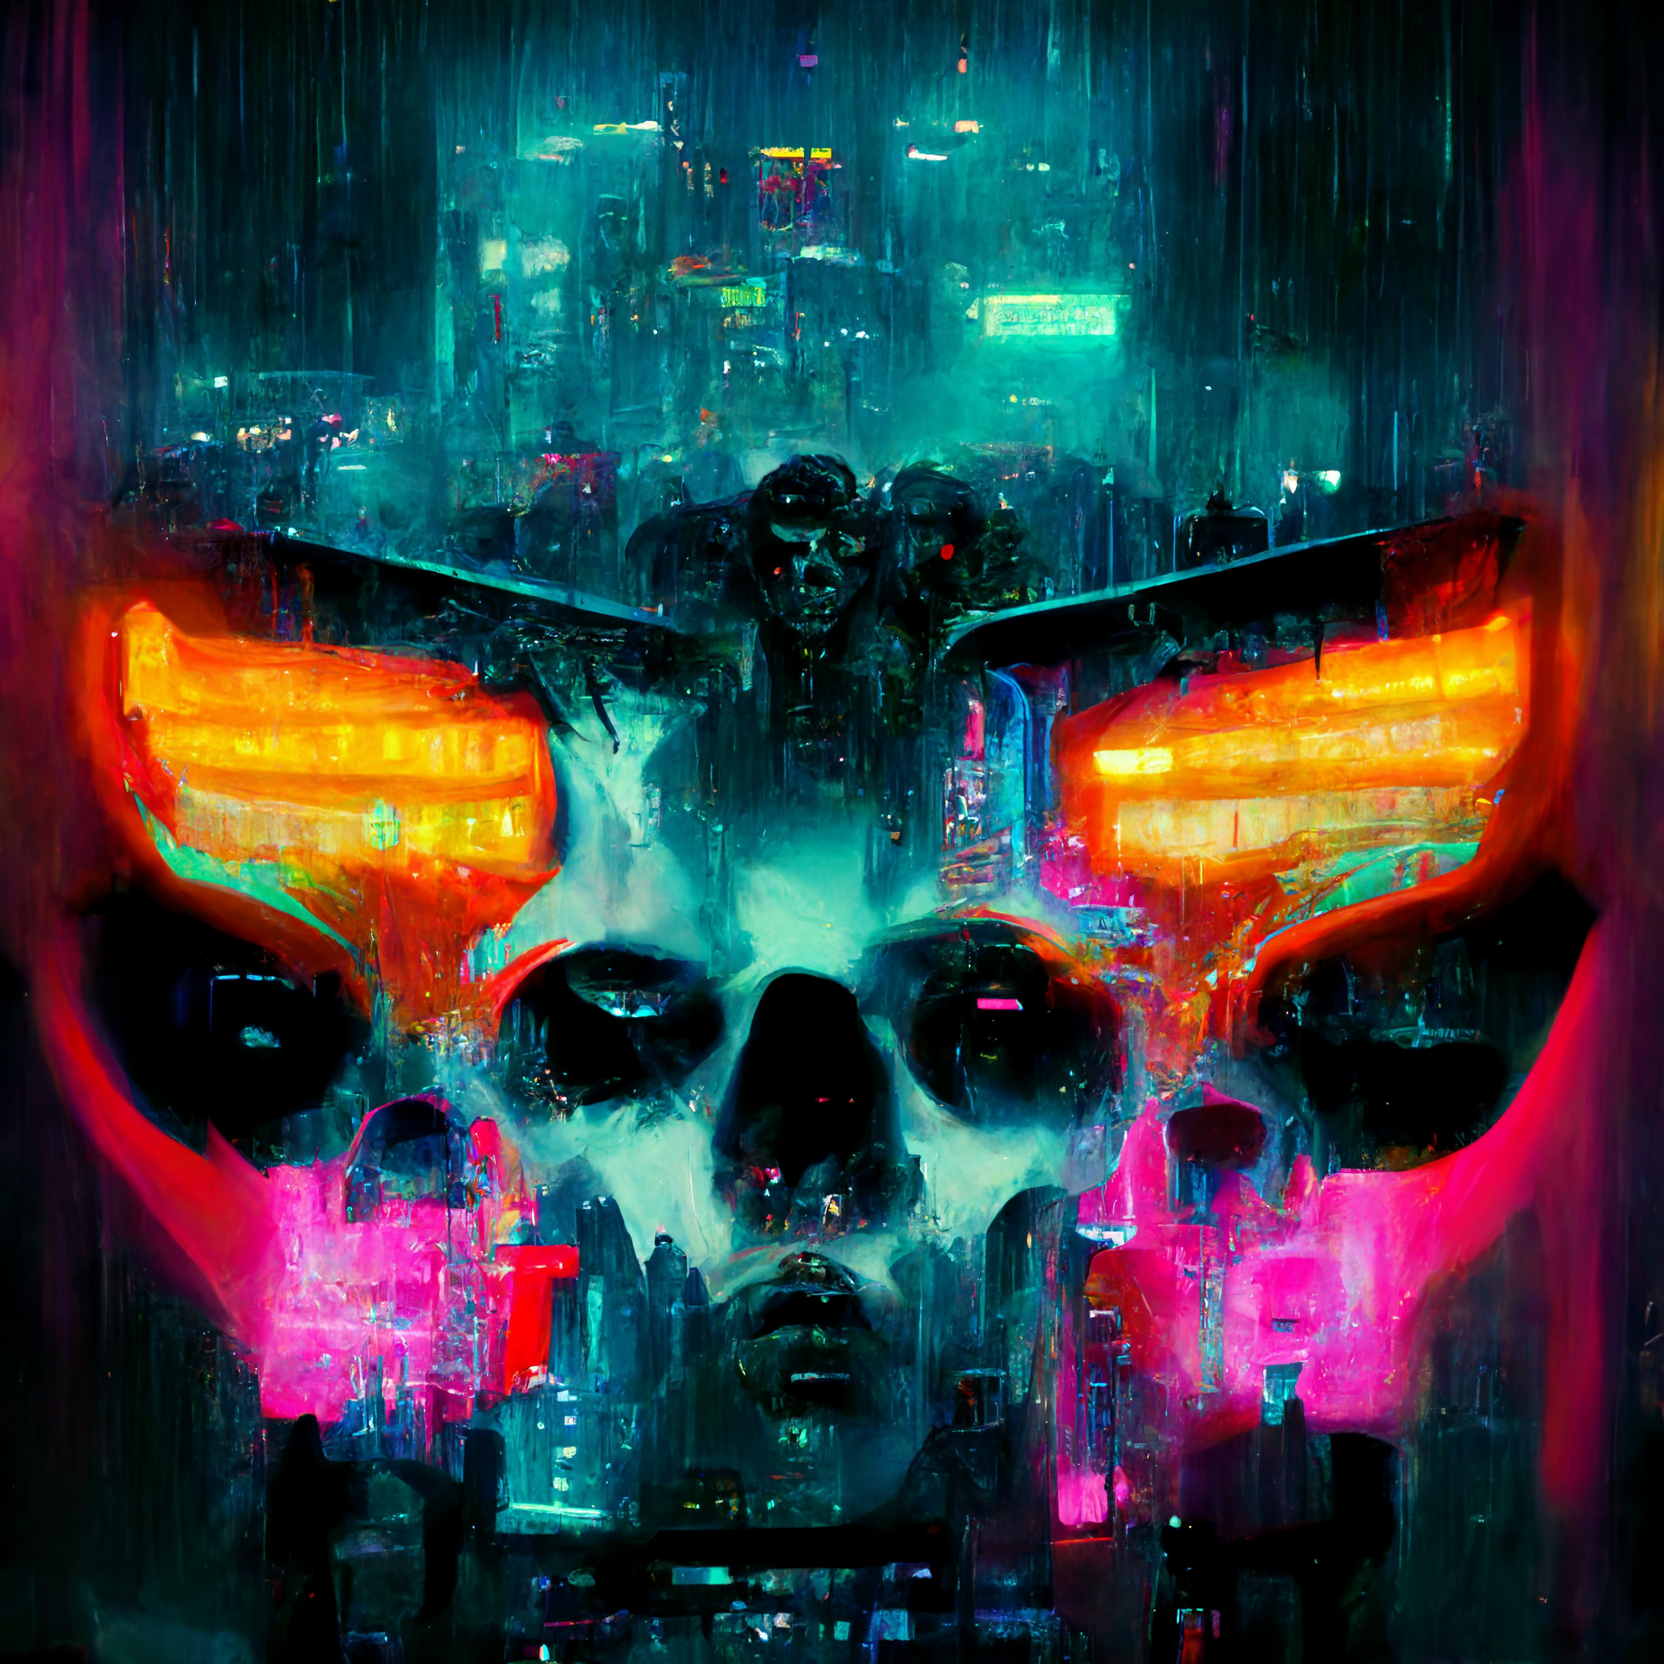 5262f78f-213e-43e9-b92d-3a5d5a7d7844_distortionWave_armies_of_angels_and_devils_fighting_against_each_other_in_a_valley_of_skulls_bladerunner_dark_cyber